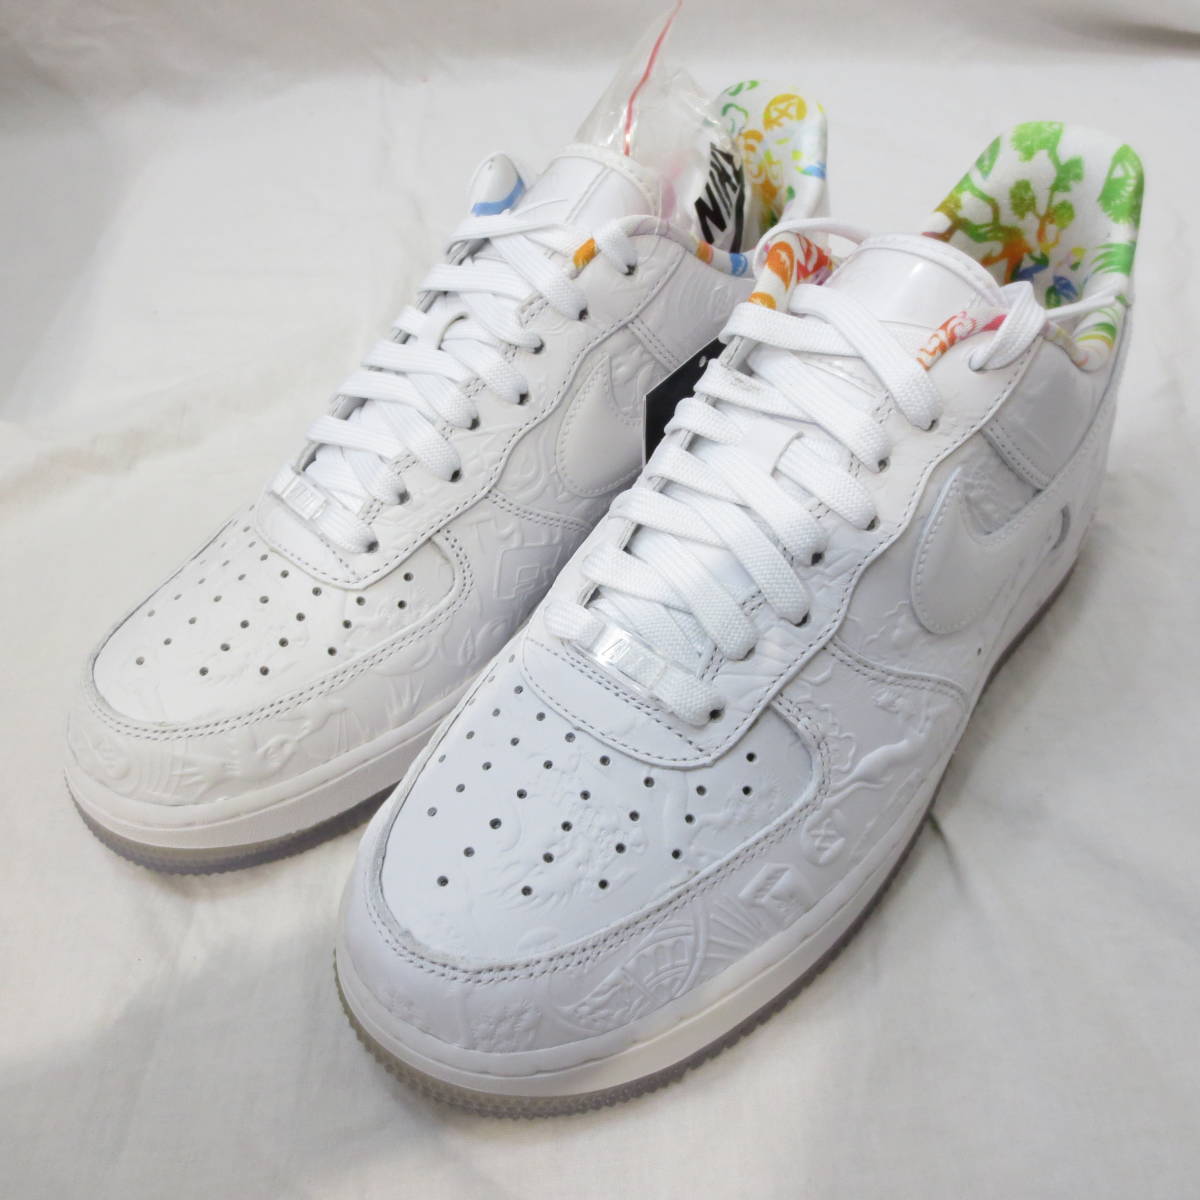 NIKE AIR FORCE 1 LOW CHINESE NEW YEAR (2020) CU8870-117 ナイキ